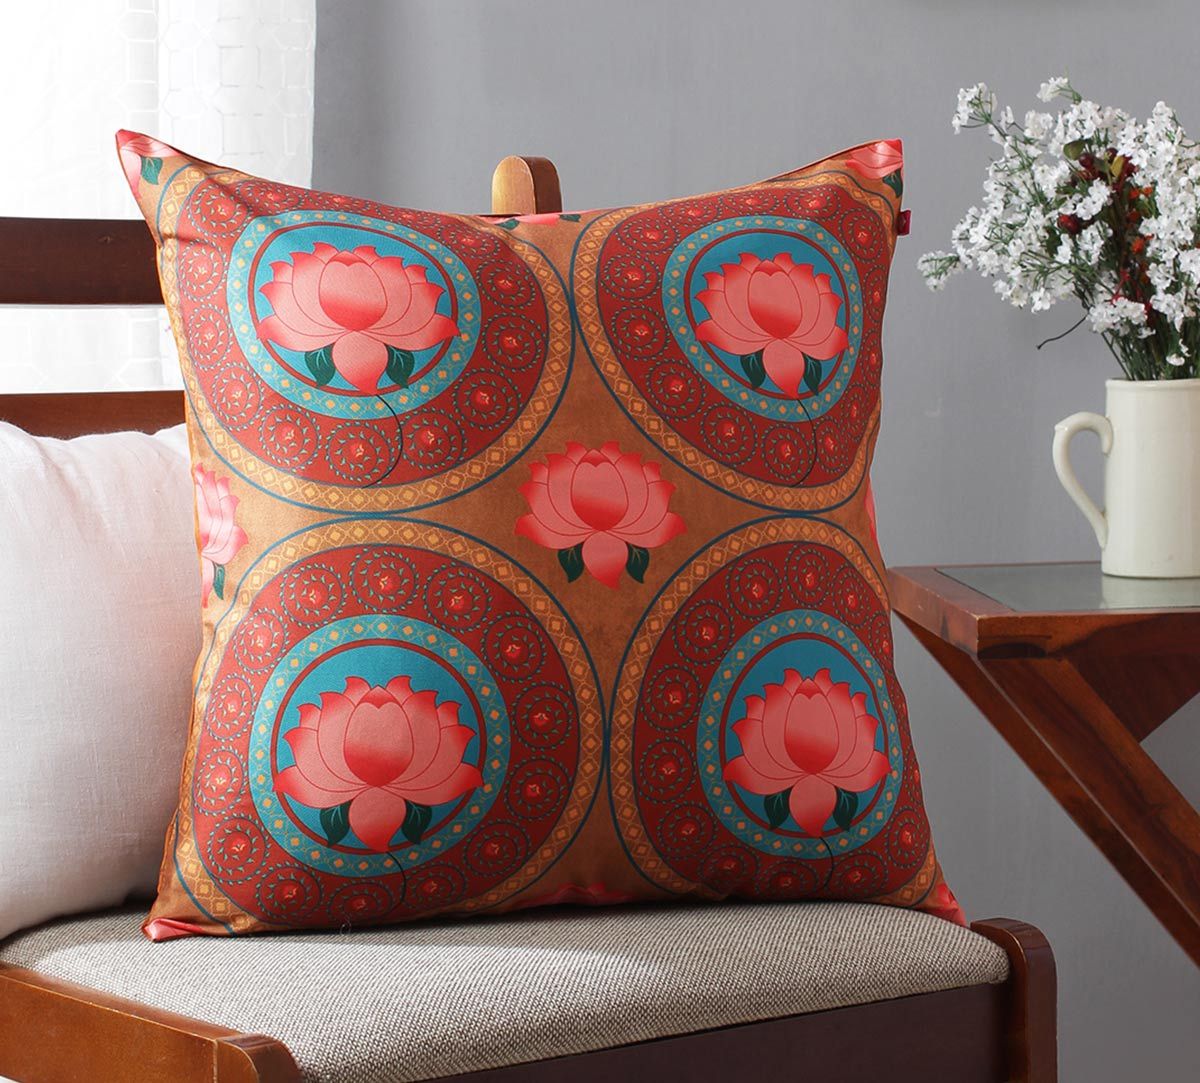 India Circus Amber Platter Symmetry Blended Taf Silk Cushion Cover